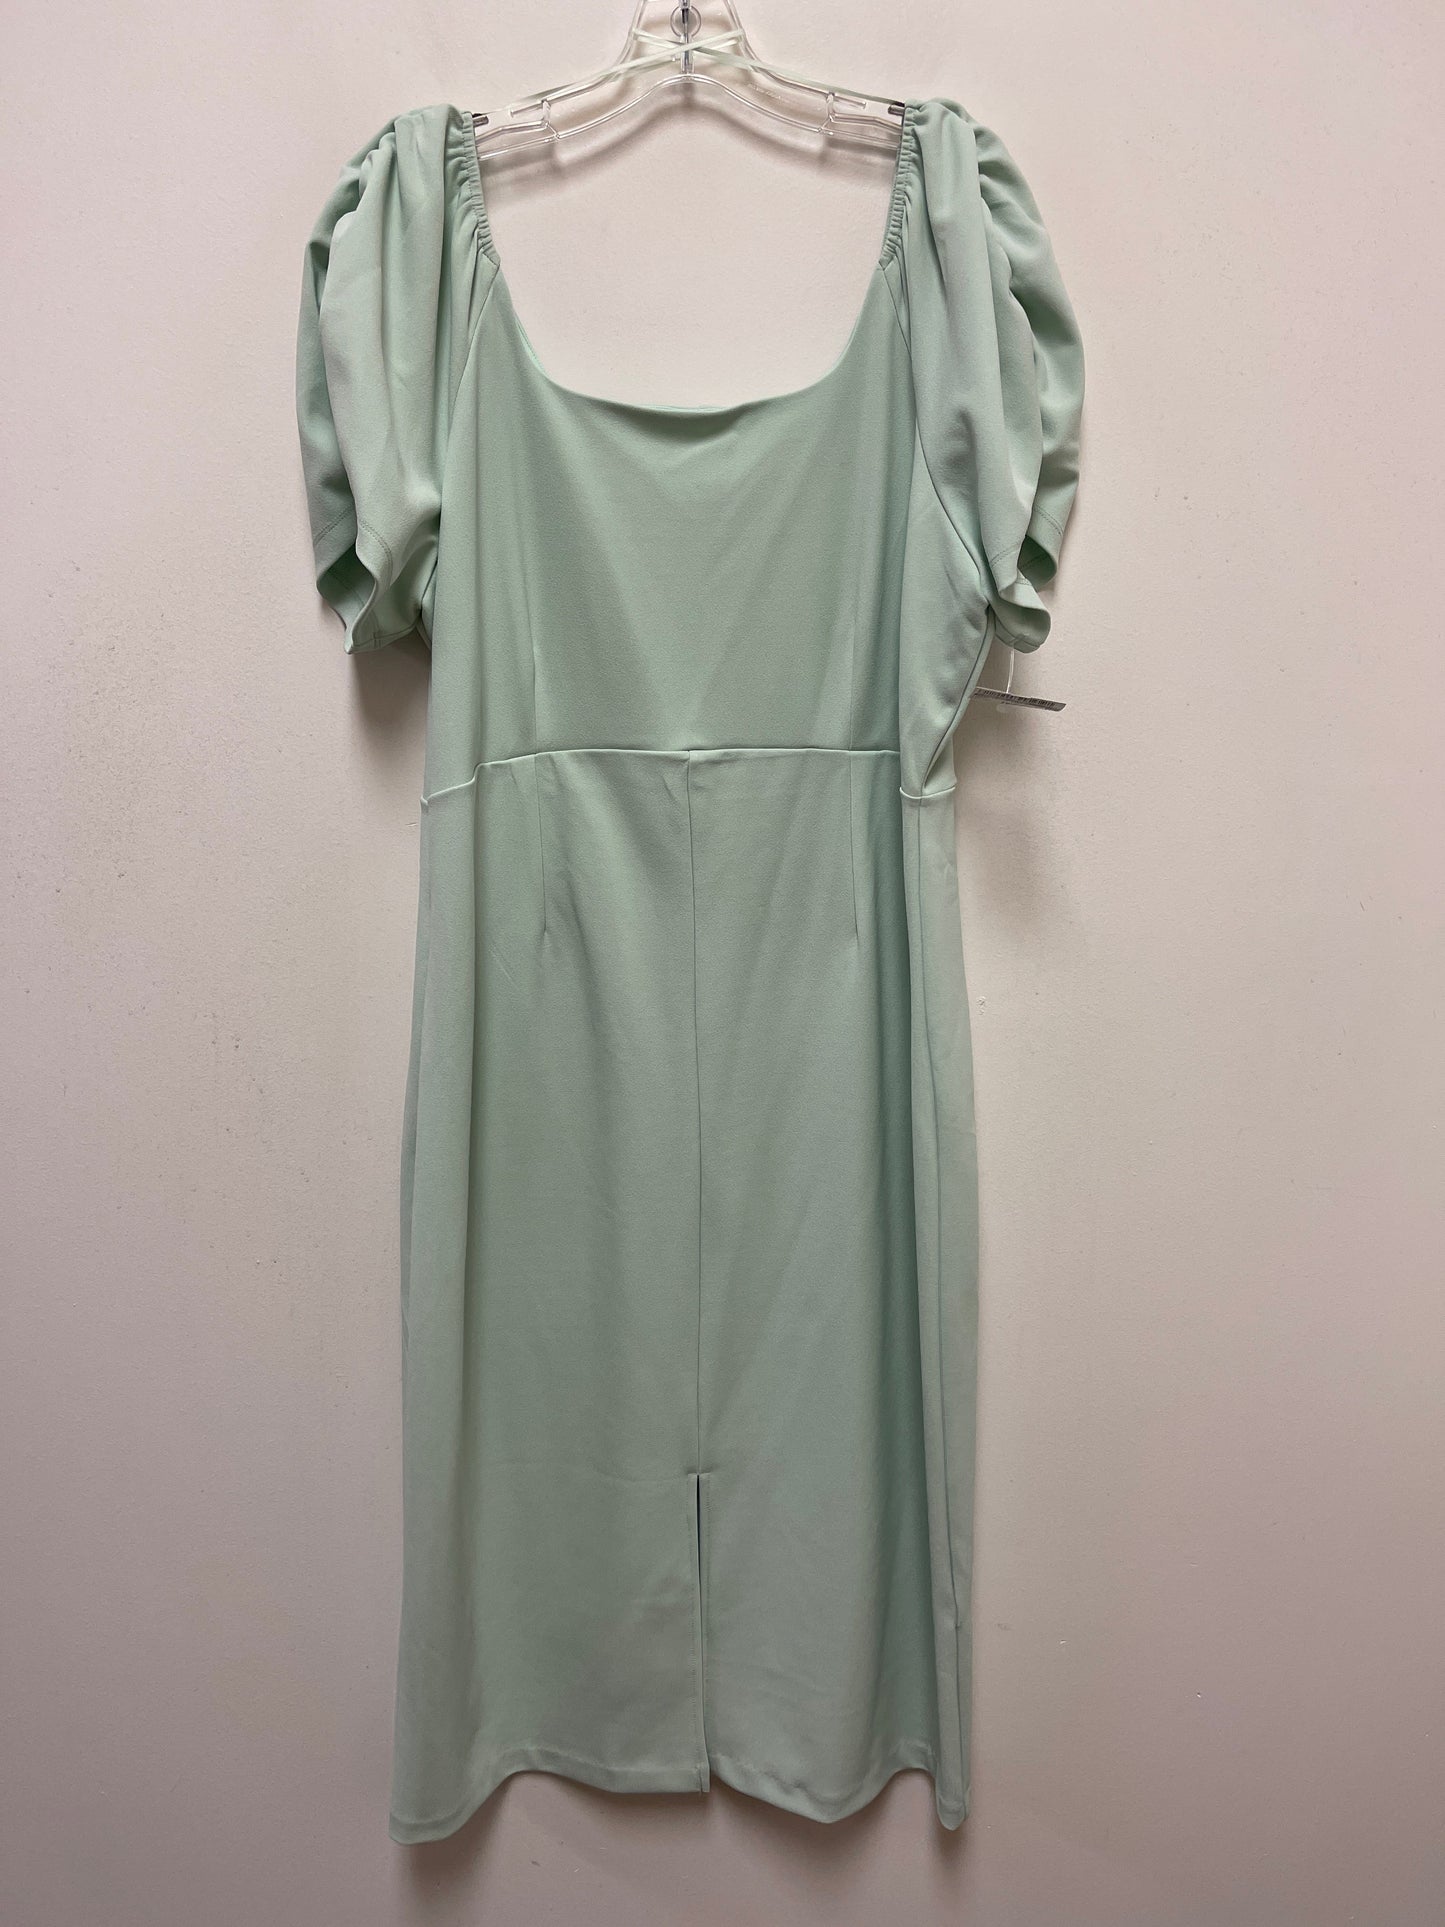 Green Dress Casual Midi Gibson And Latimer, Size 2x